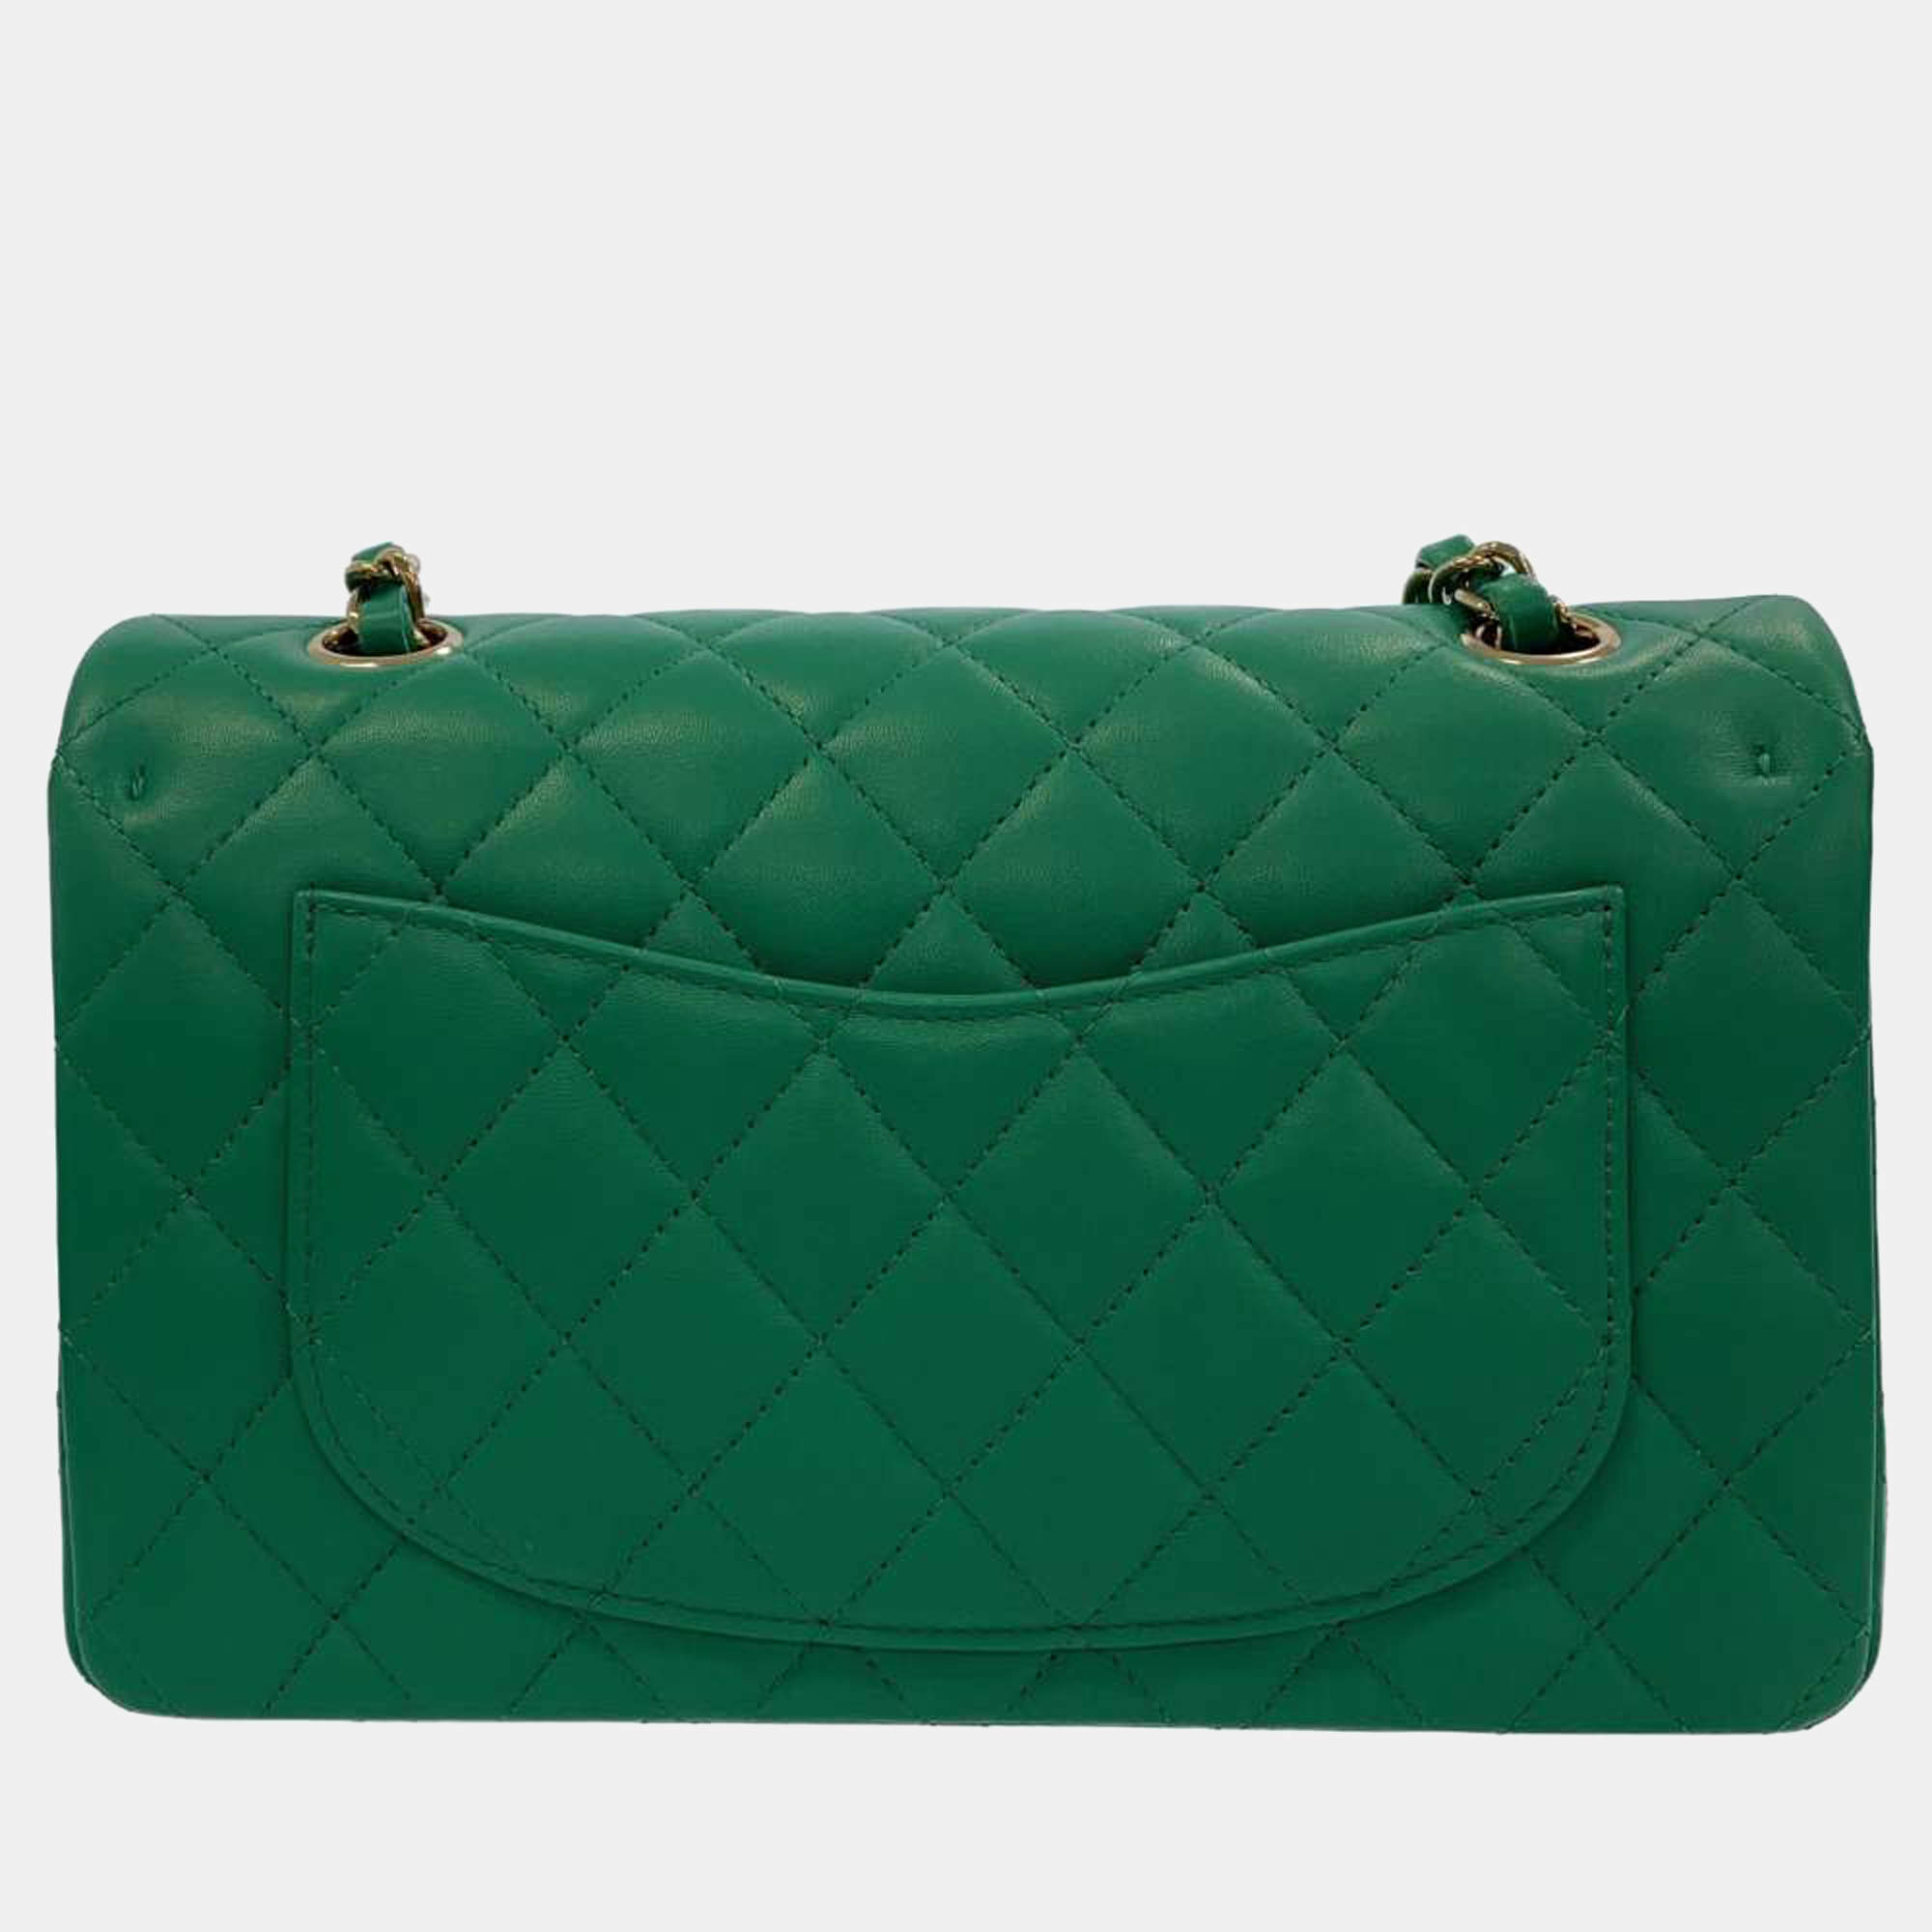 Chanel Green Lambskin Leather Small Classic Double Flap Shoulder